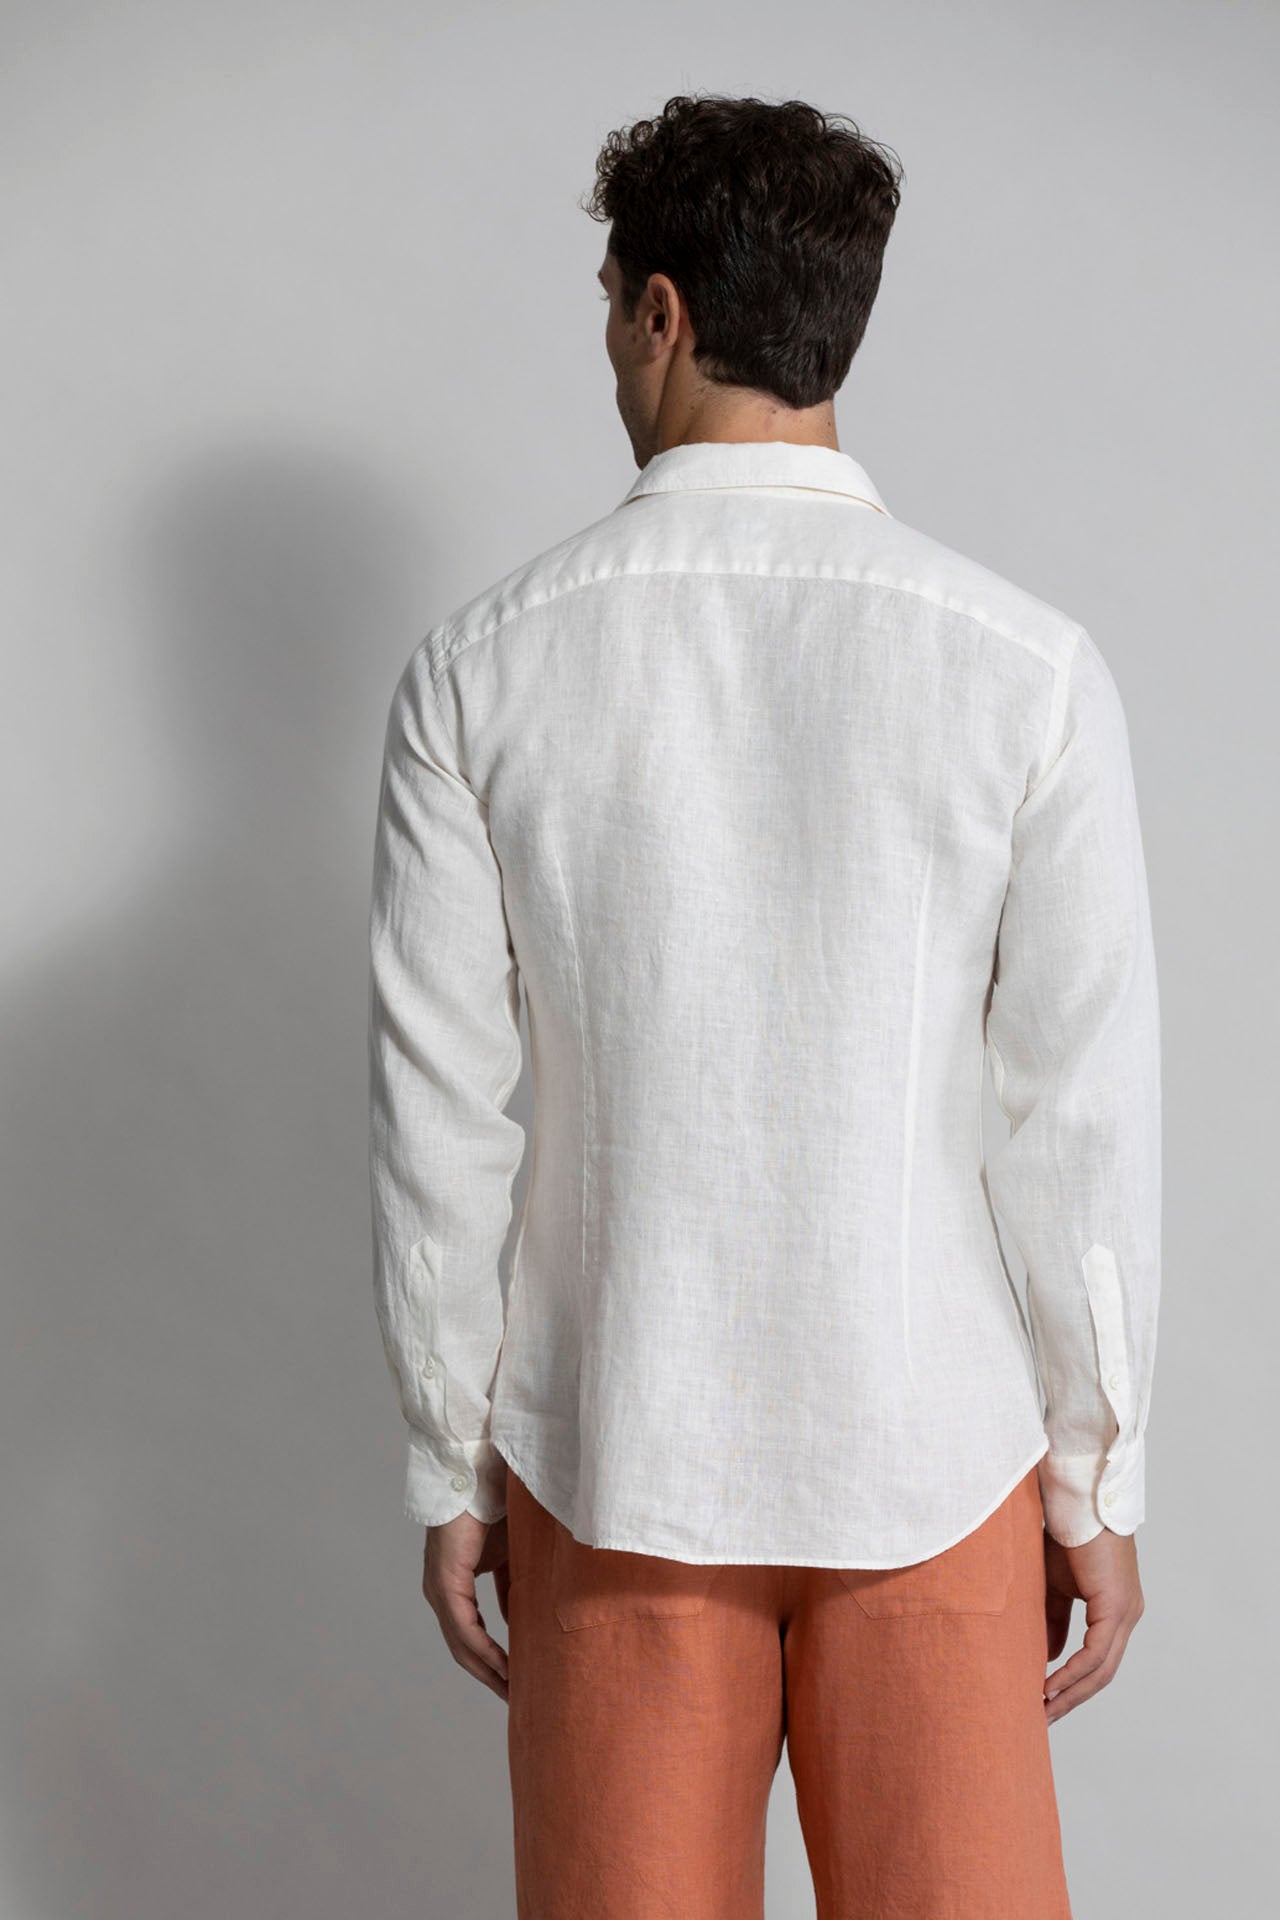 Men's Linen Shirts with Long Sleeve - White - Back